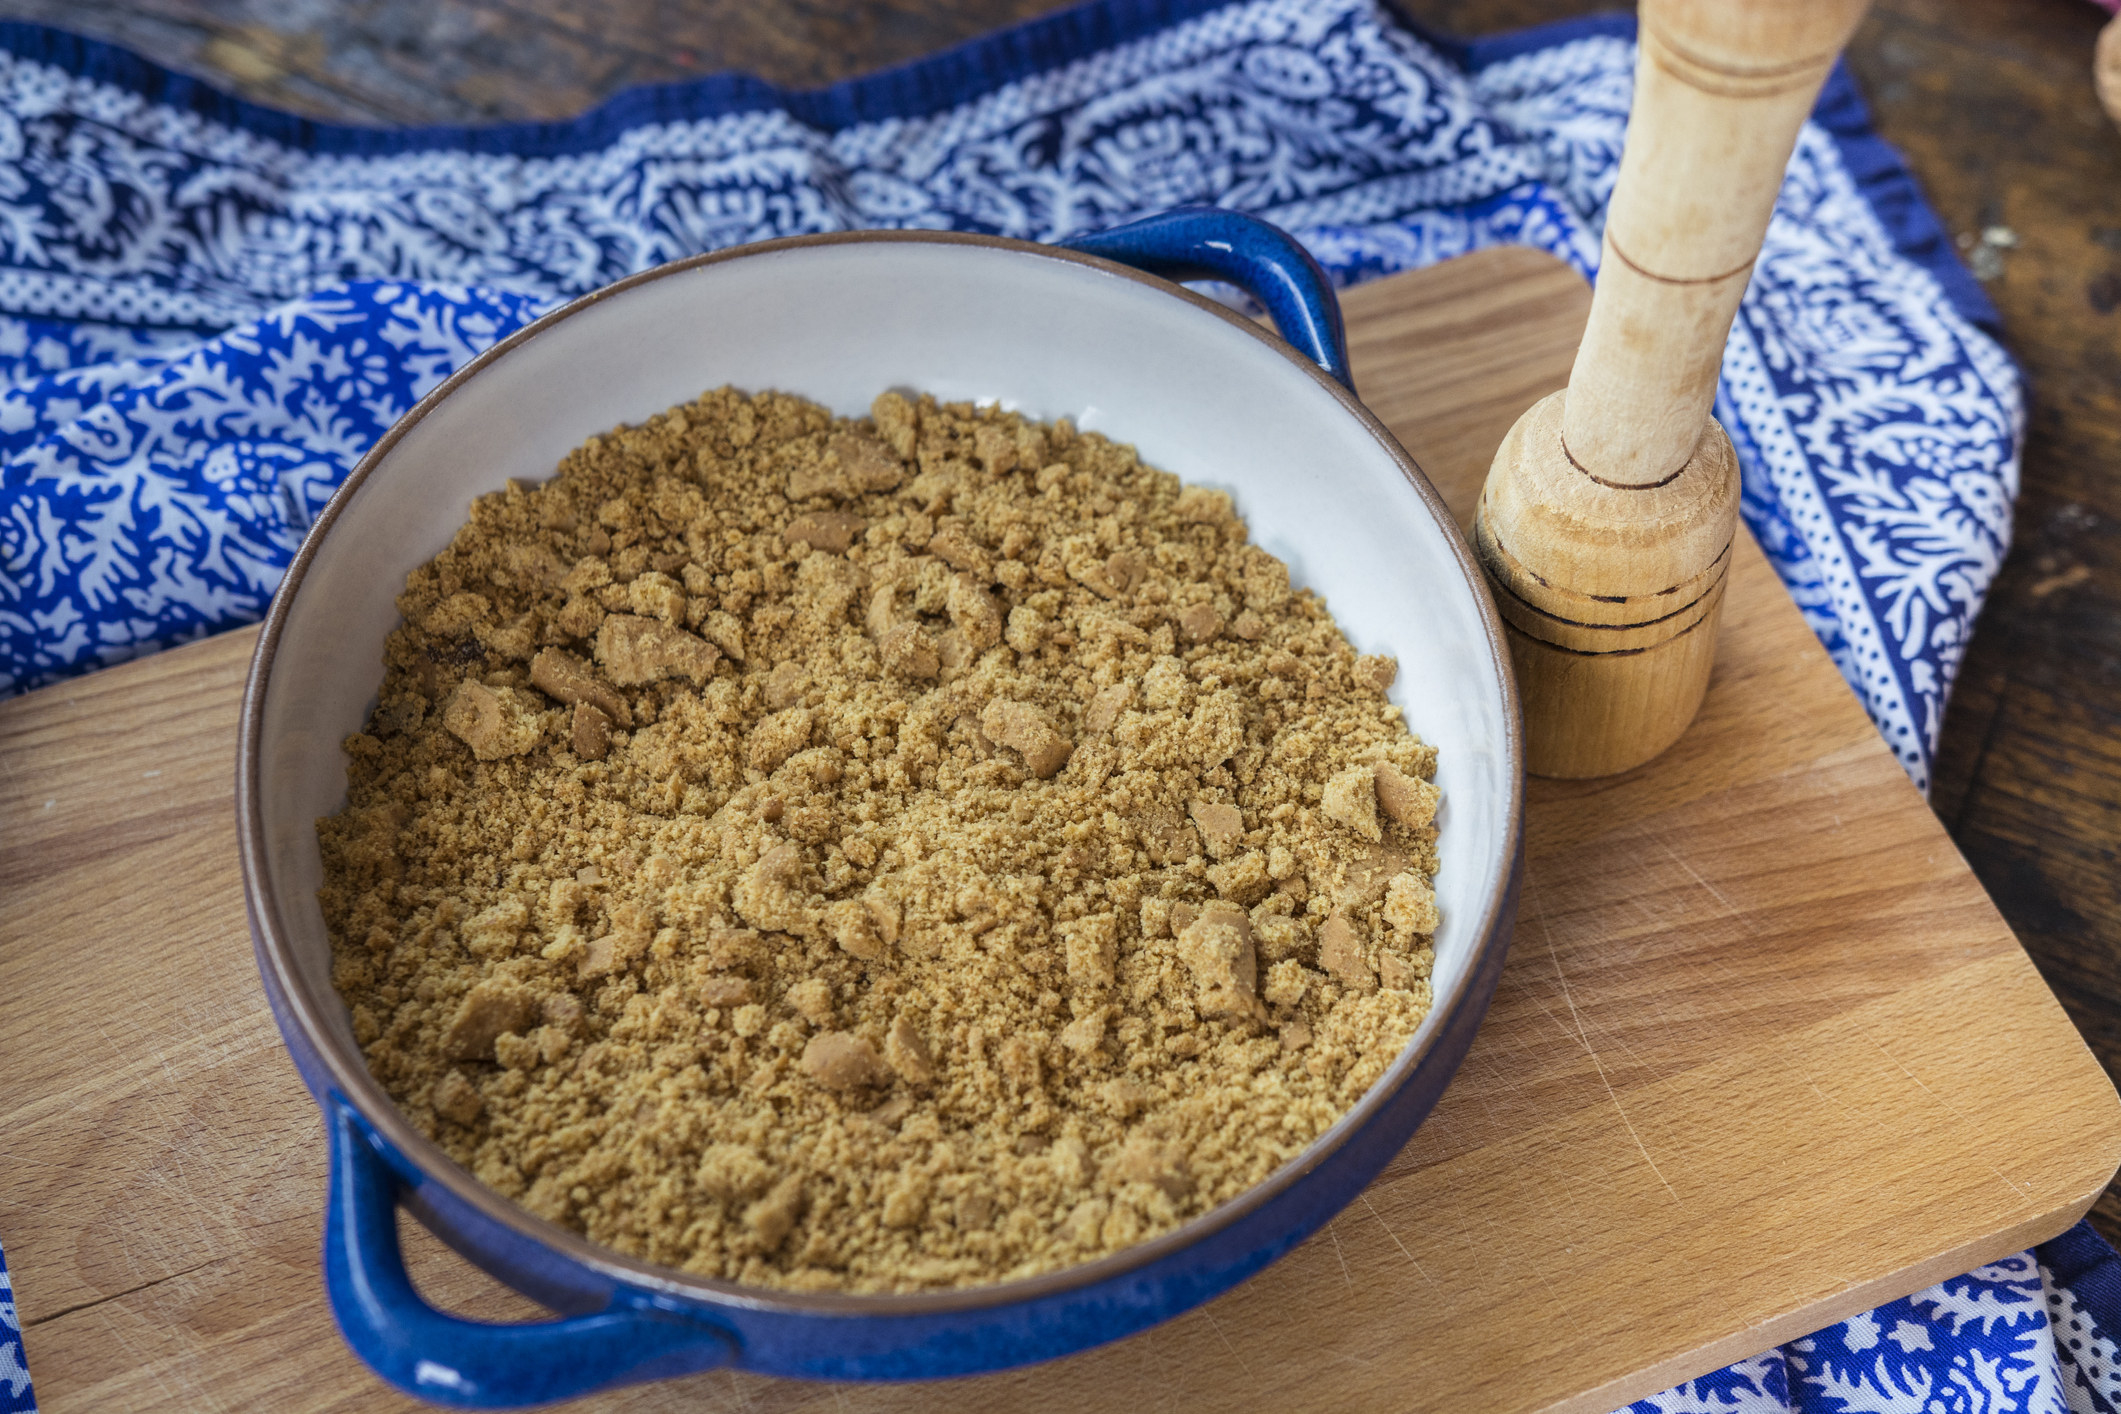 Forming a Graham cracker crust in a pie dish.